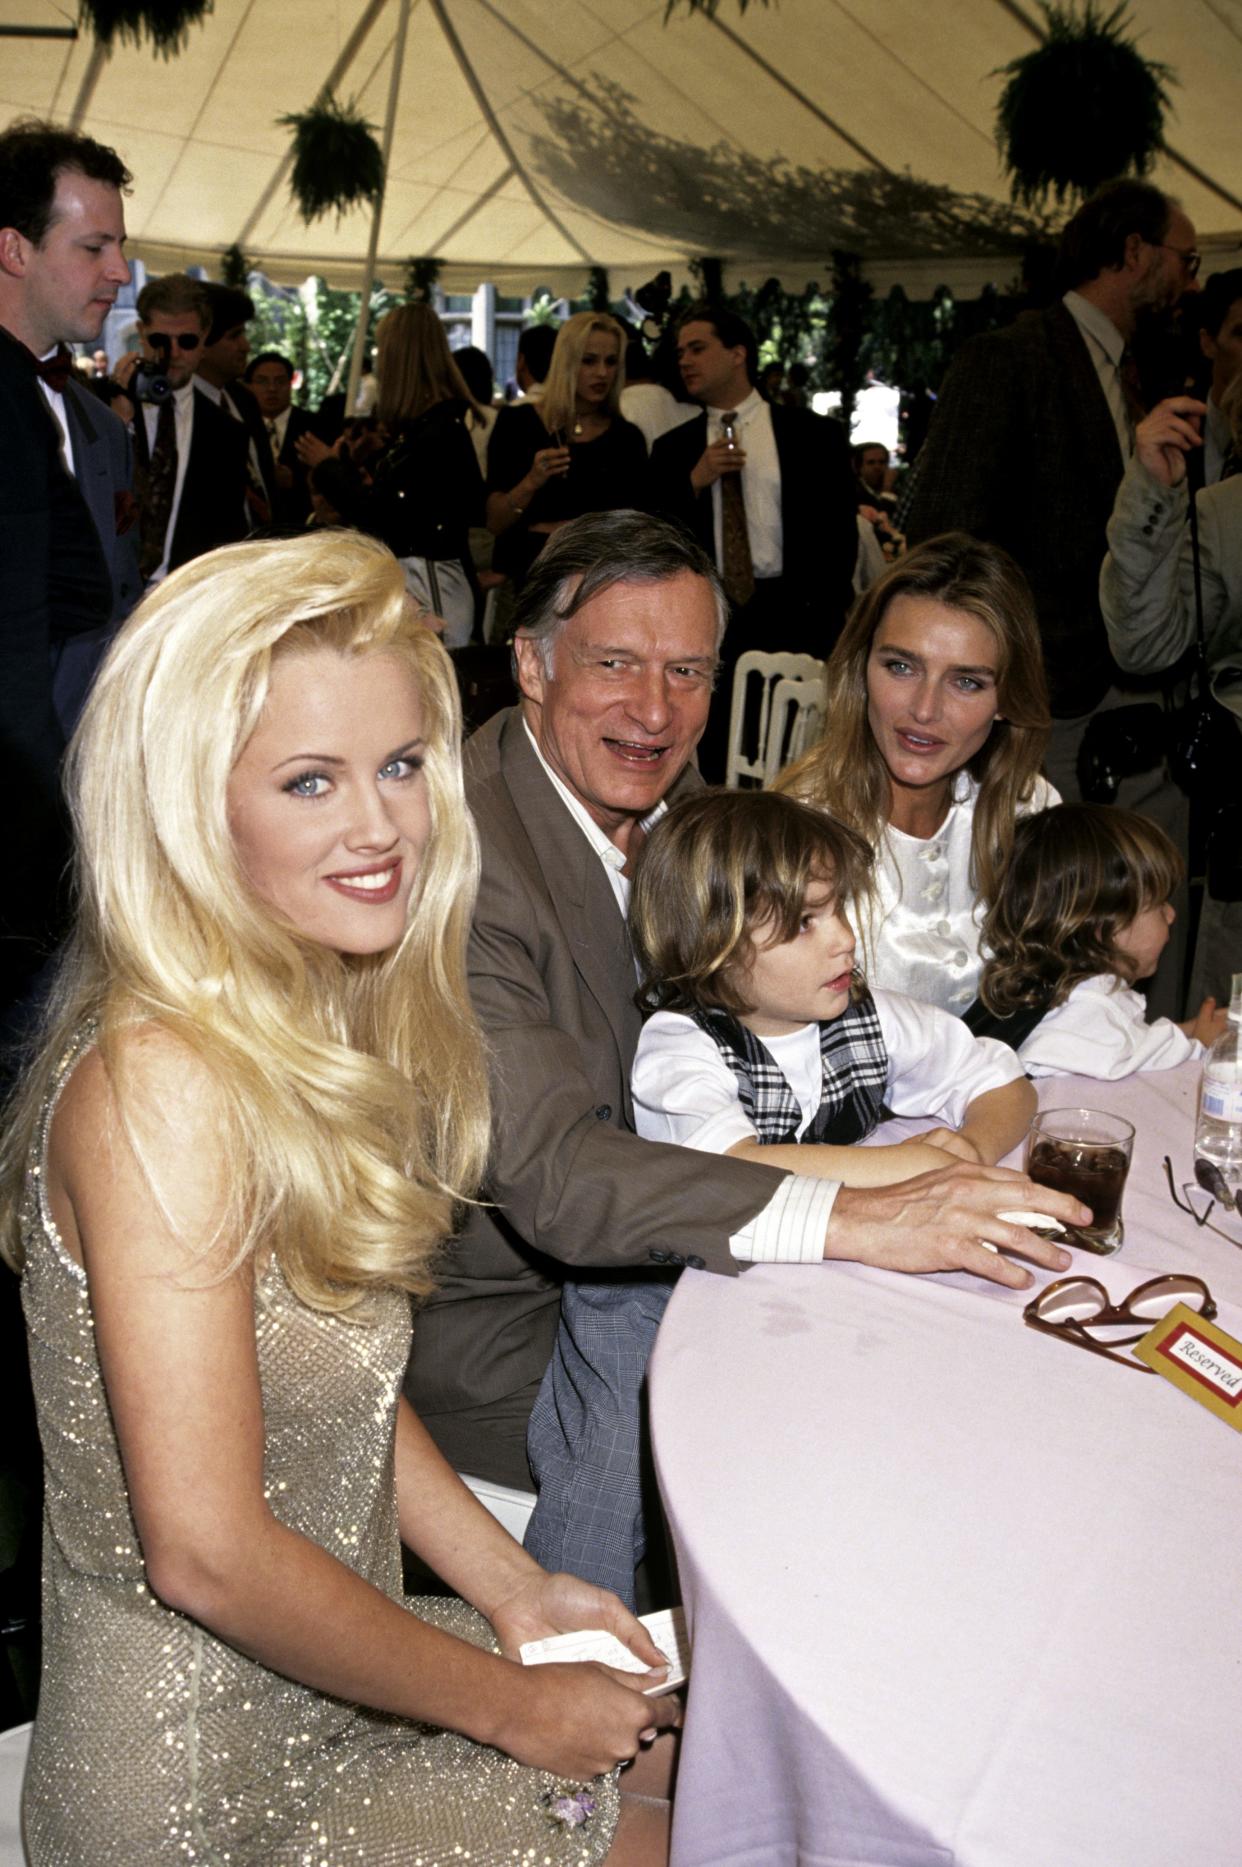 Jenny McCarthy, 1994 Playmate of the Year, with Hugh Hefner and family celebrating at the VSDA Convention in Las Vegas.
April 28, 1994
©RTNBarrett / MediaPunch/IPX